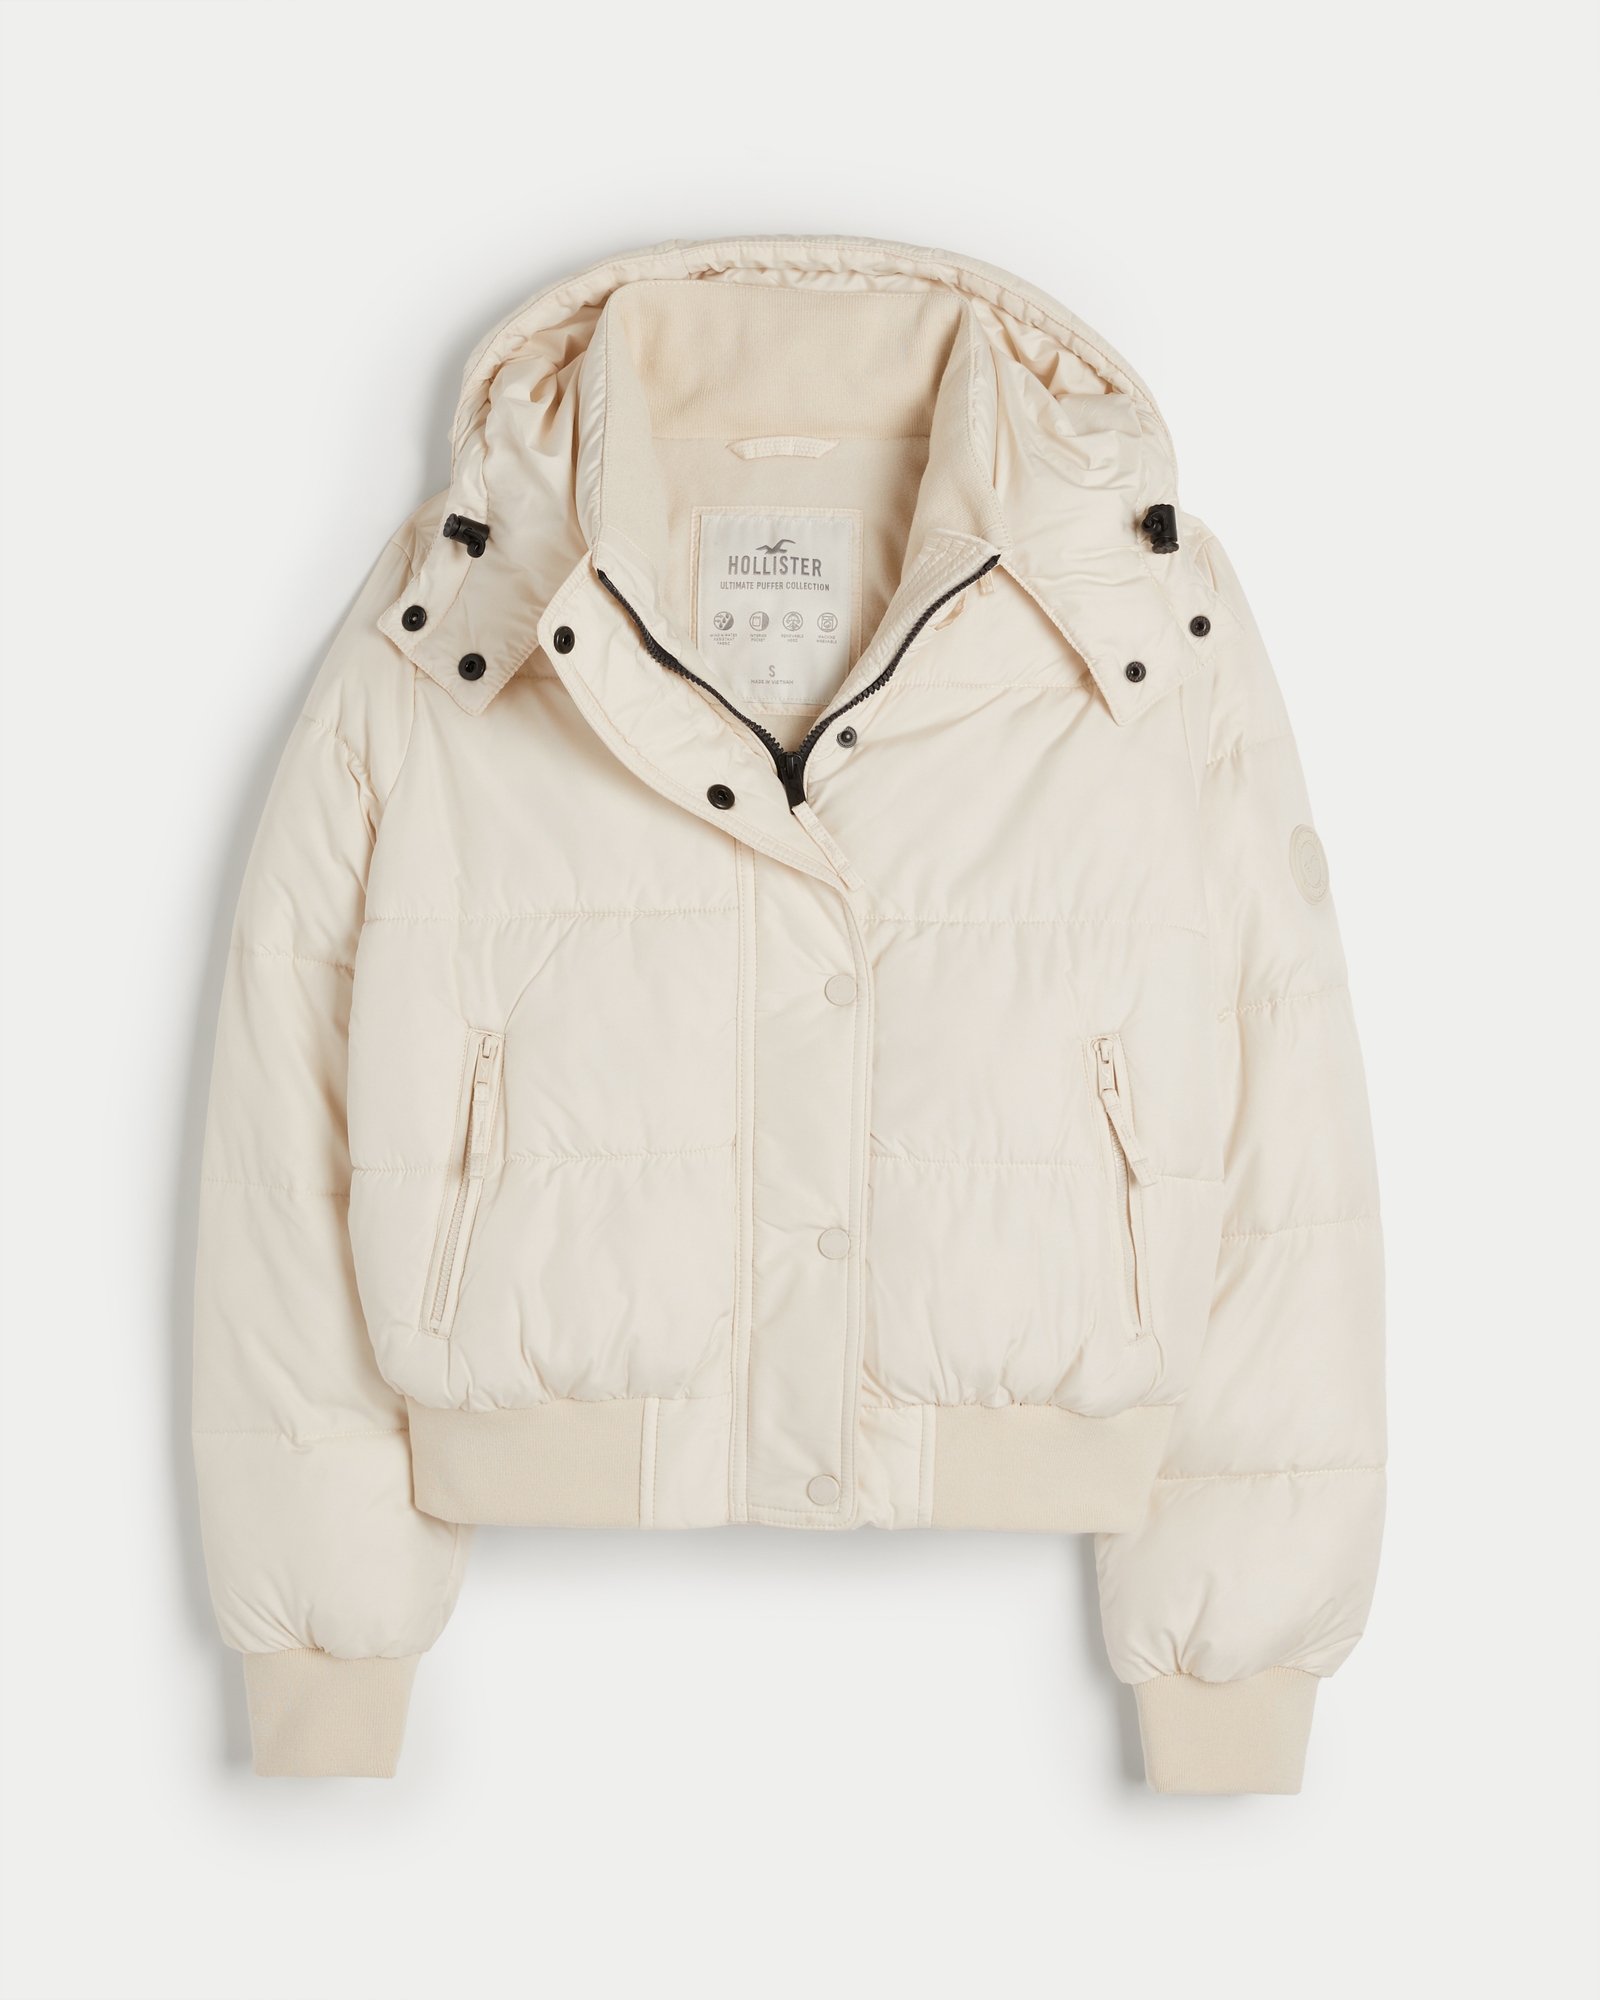 Hollister White Puffer Jacket Size M - $11 (86% Off Retail) - From